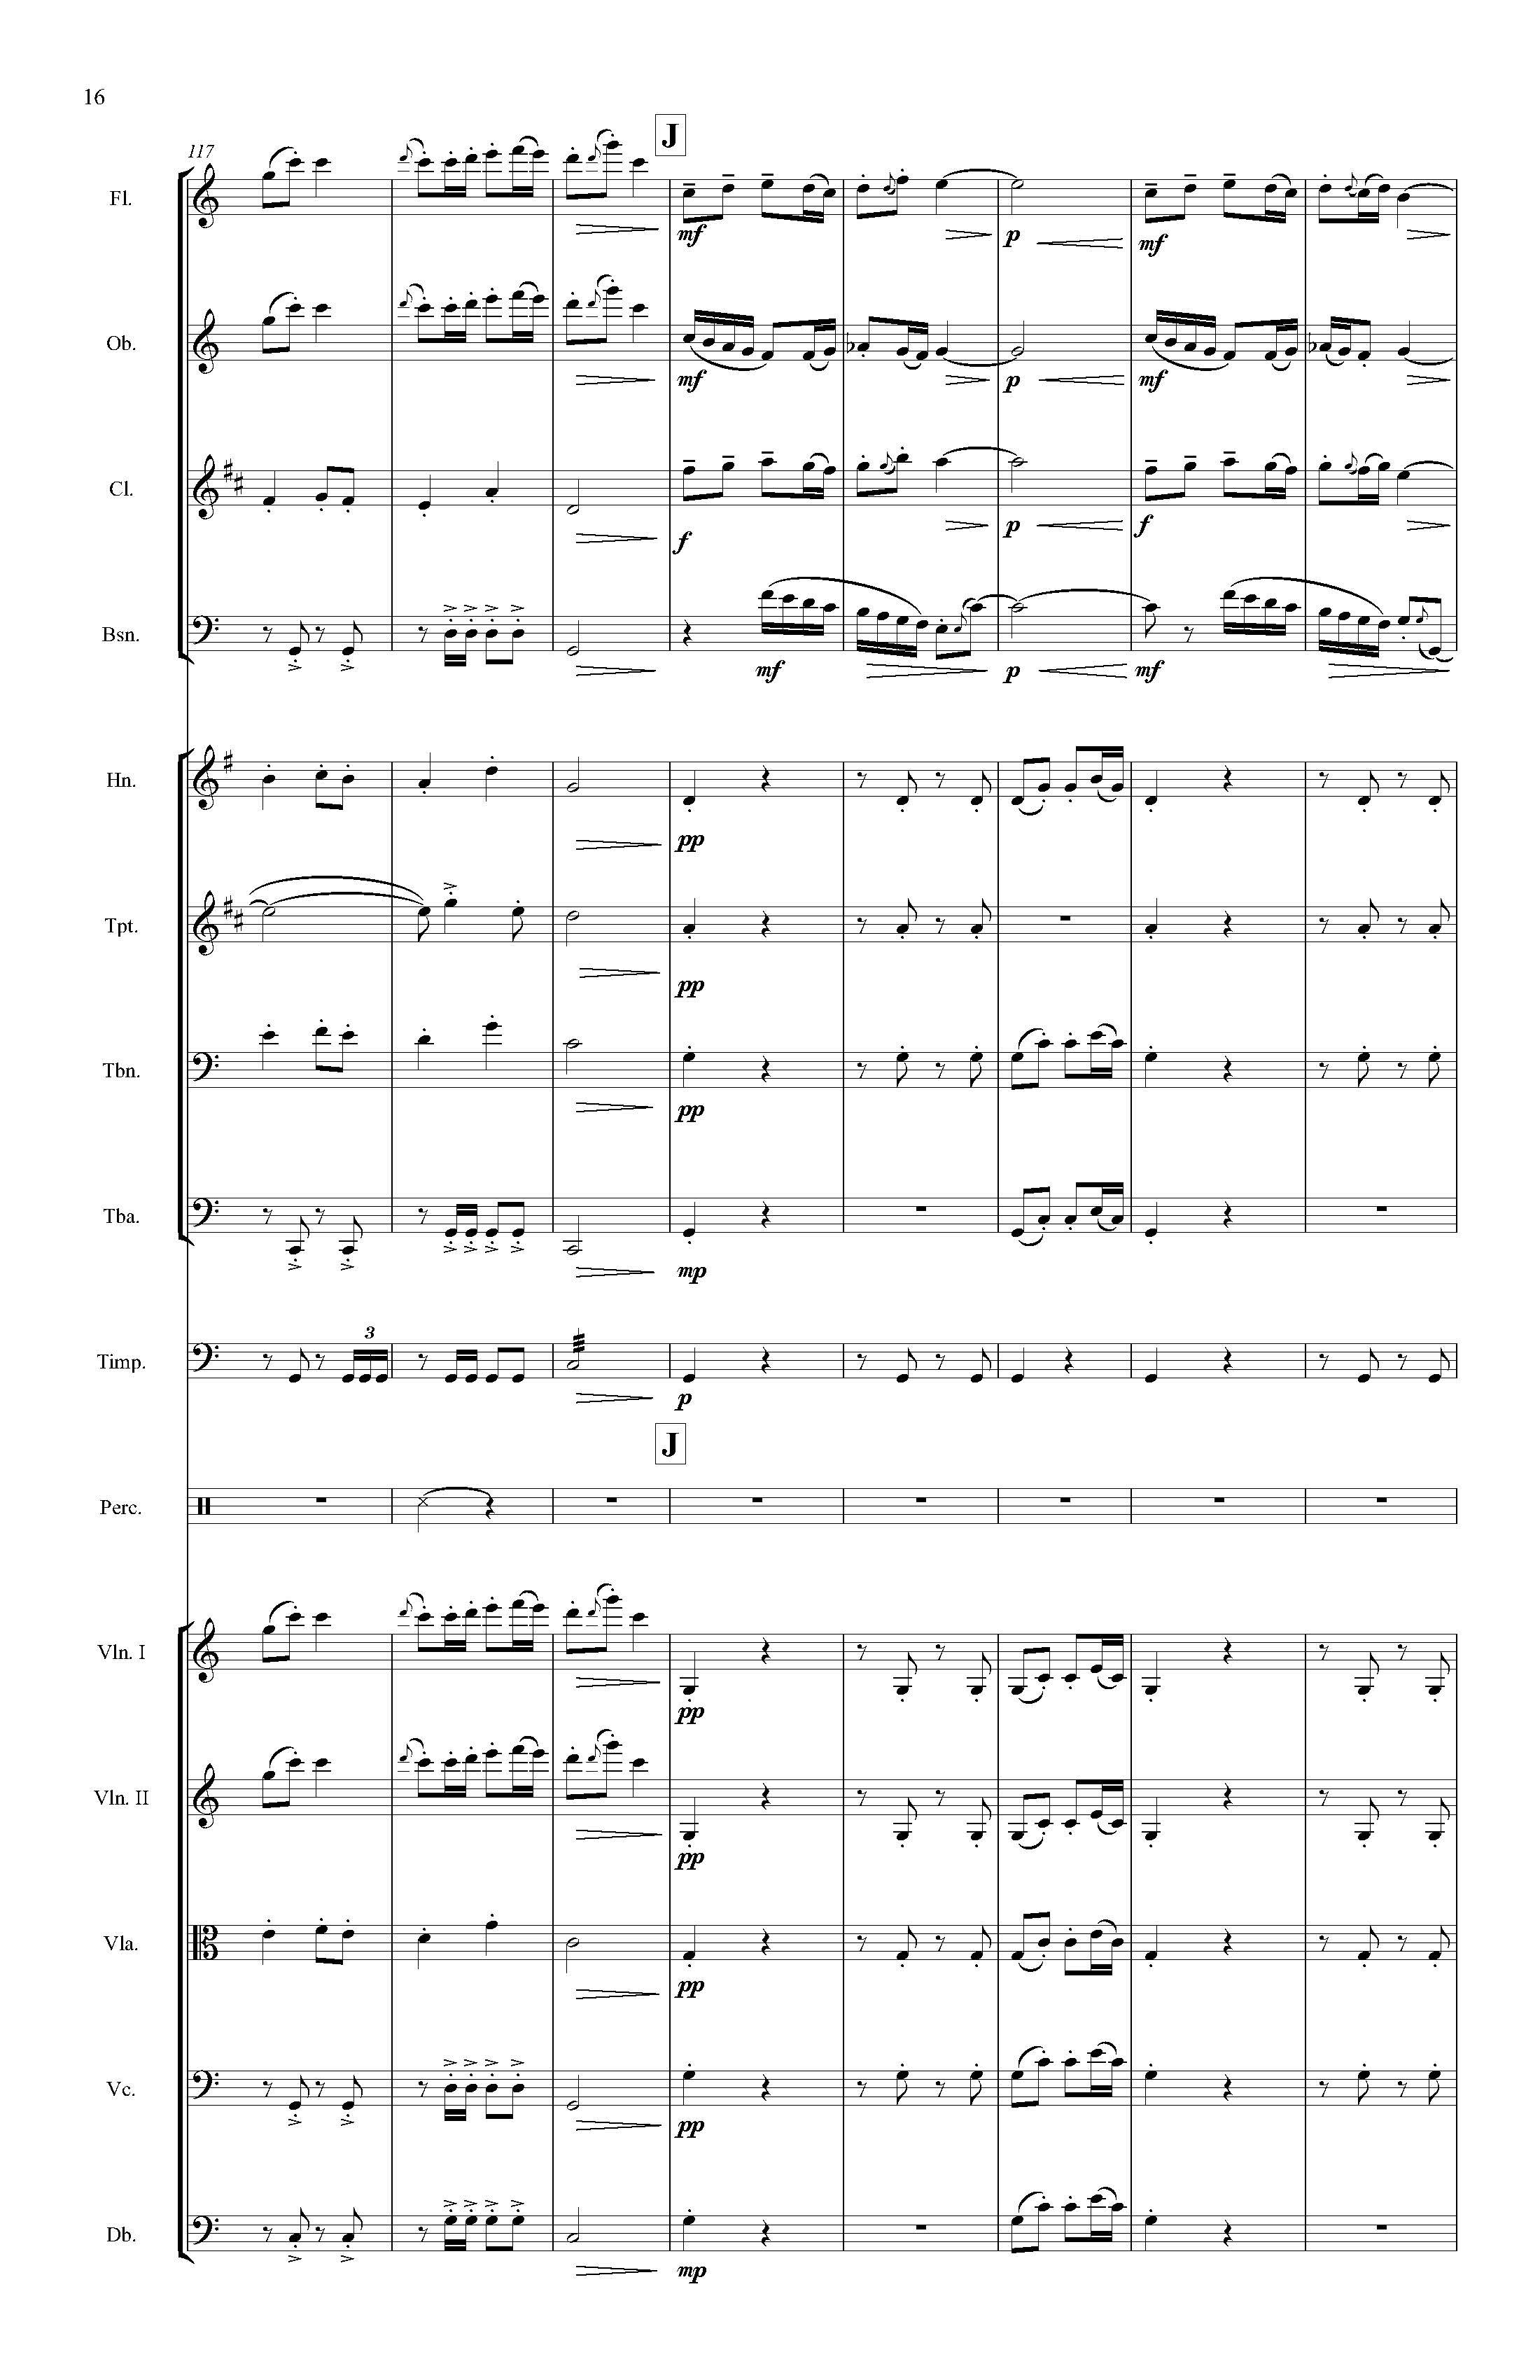 Fantasy on a French Carol - Complete Score_Page_20.jpg